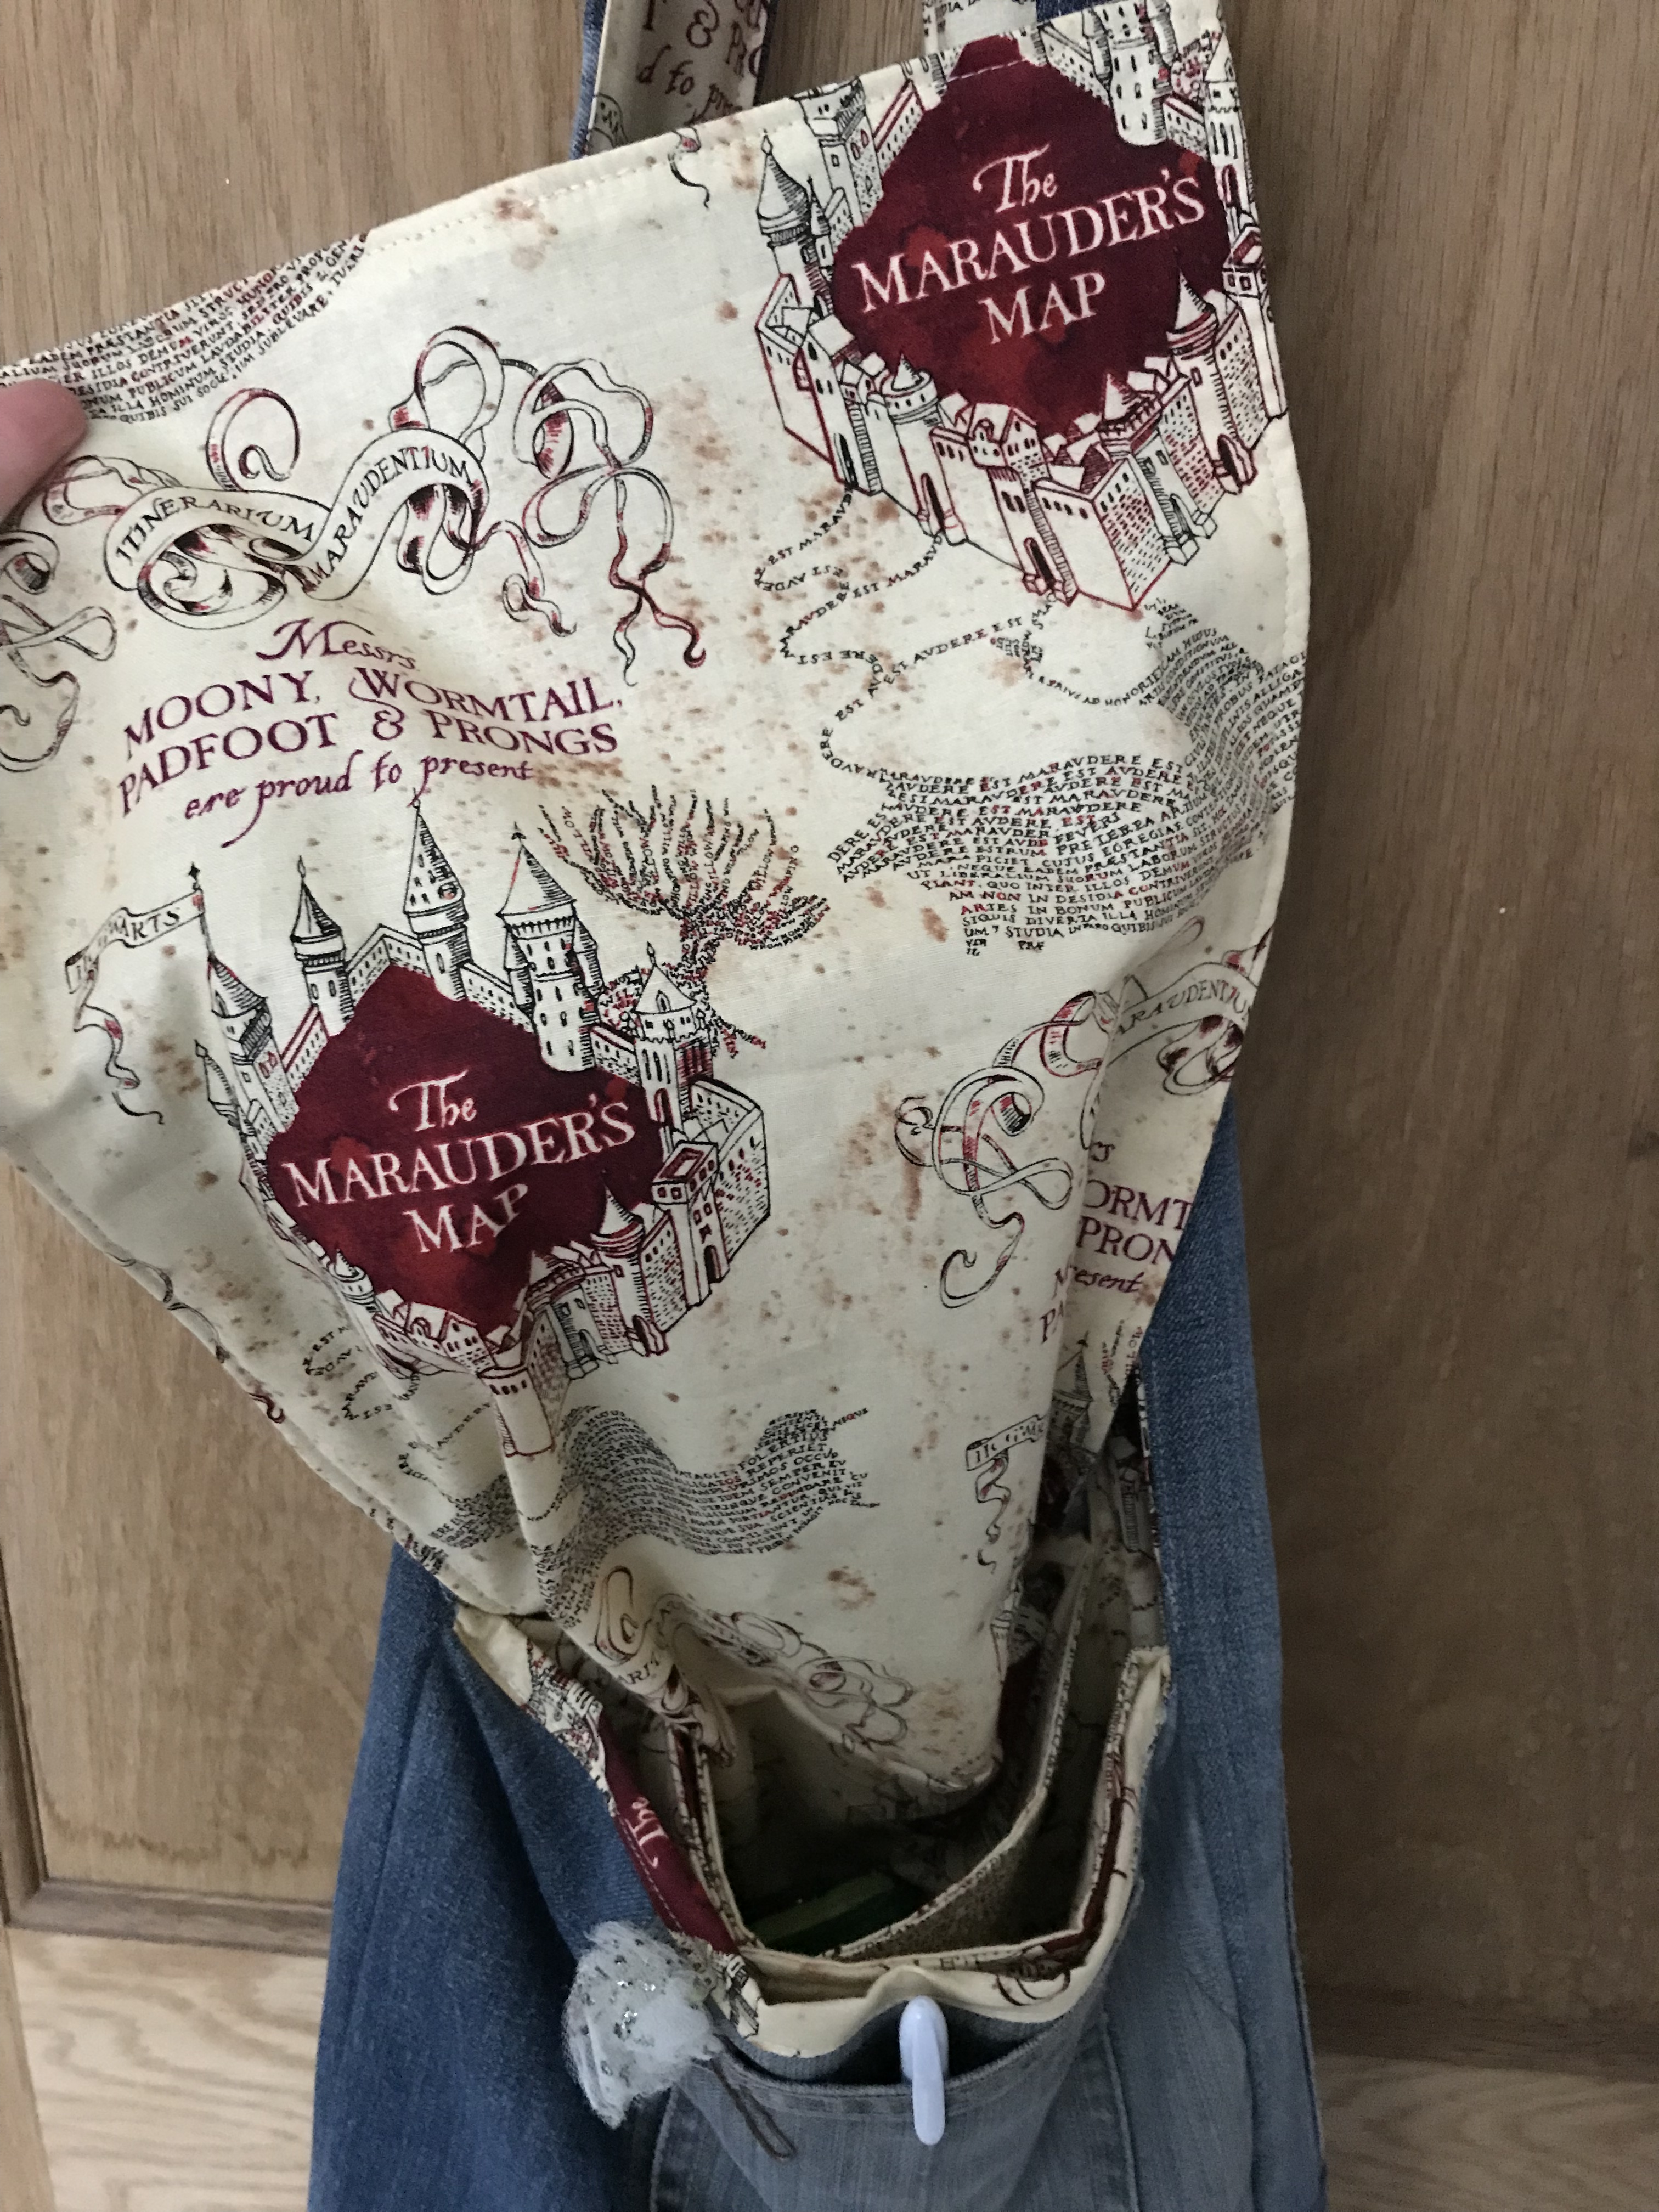 Handmade haven messenger bag made from repurposed jeans, Harry Potter marauders map fabric